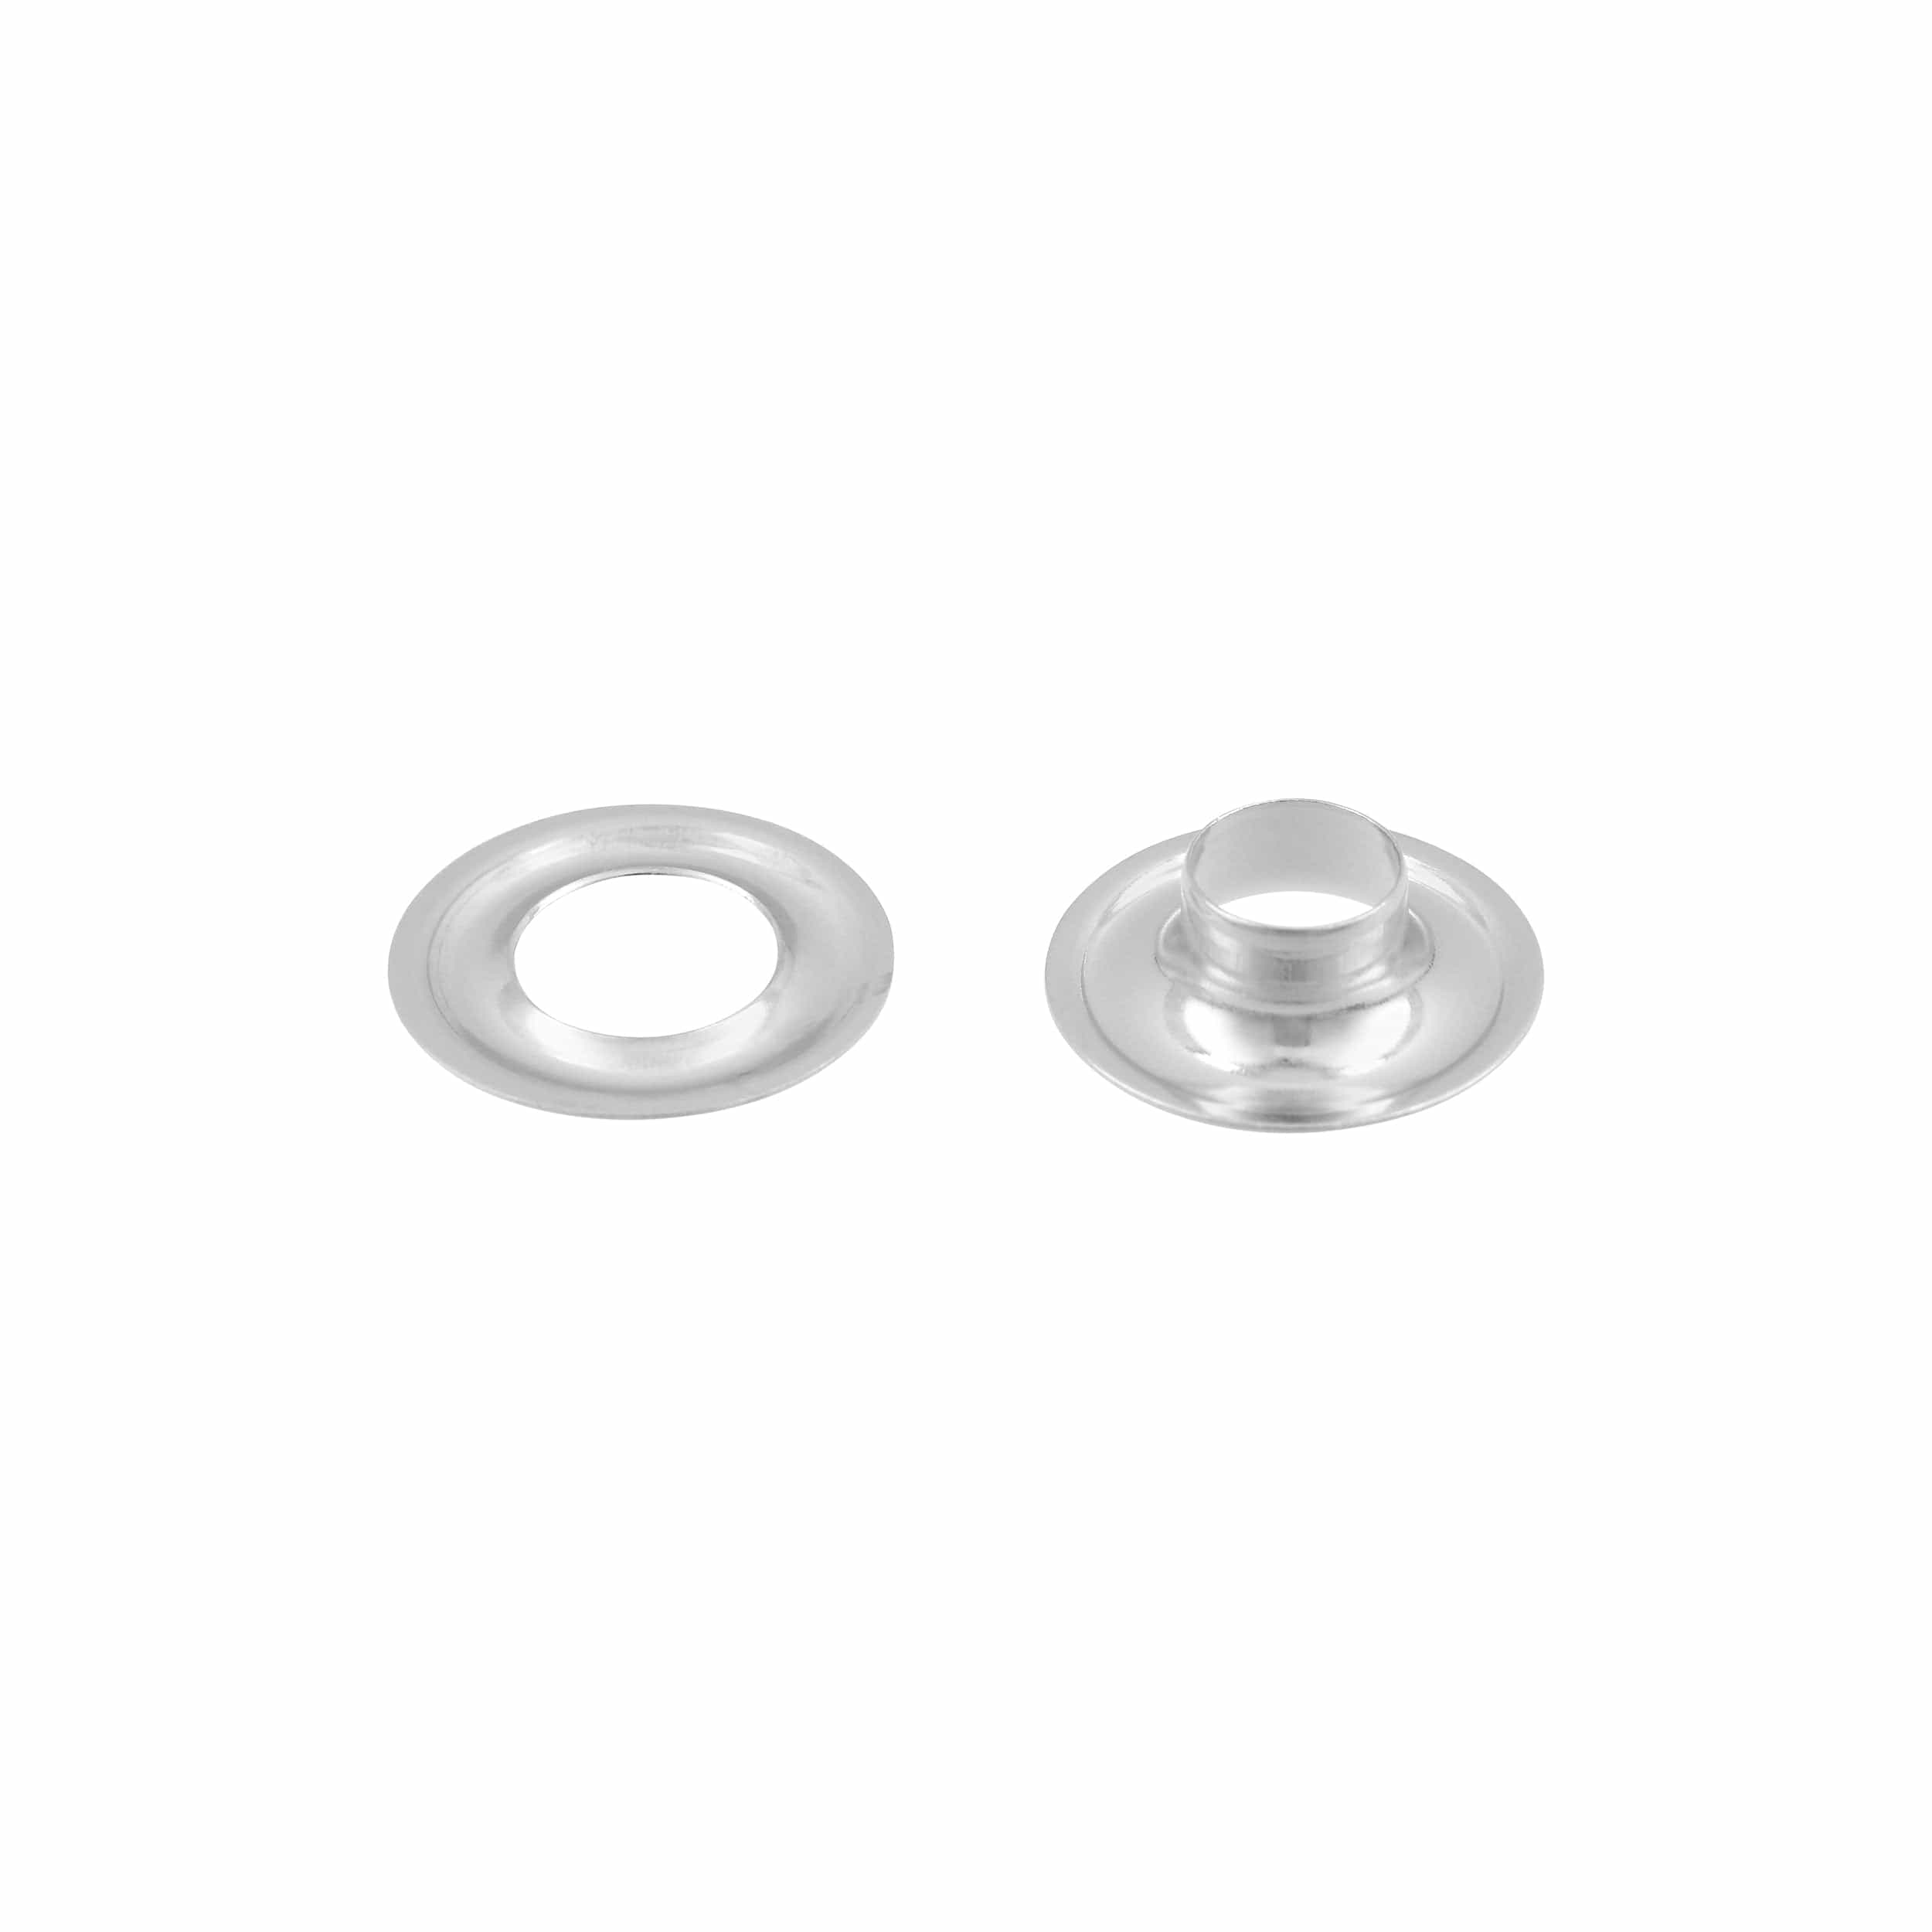 Ohio Travel Bag Fasteners #1 Nickel, Grommet with Washer, Solid Brass - 12 pk, #GROM-1-SBN GROM-1-SBN